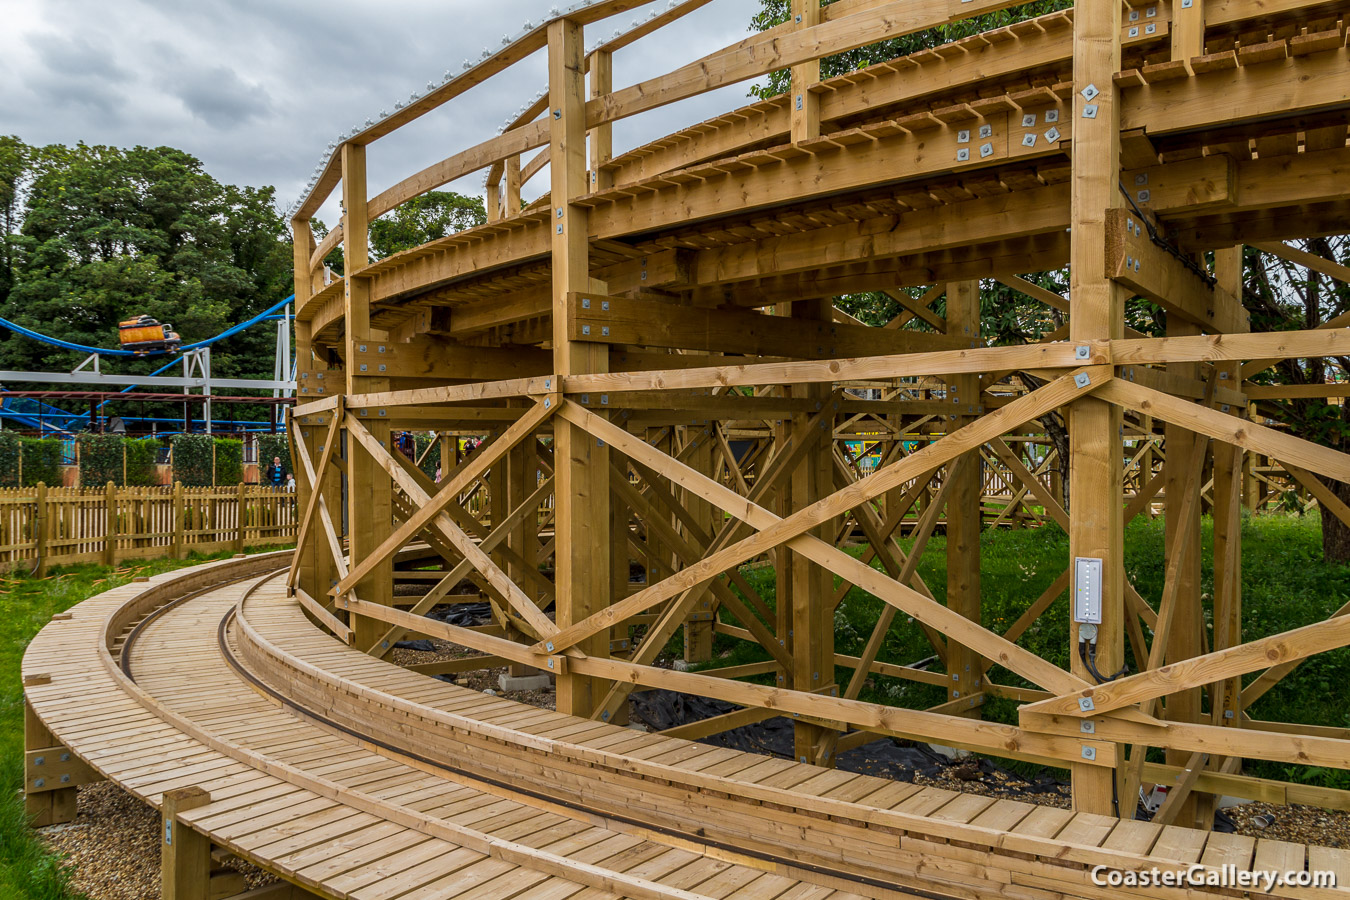 Upcycling old wood from the Scenic Railway coaster